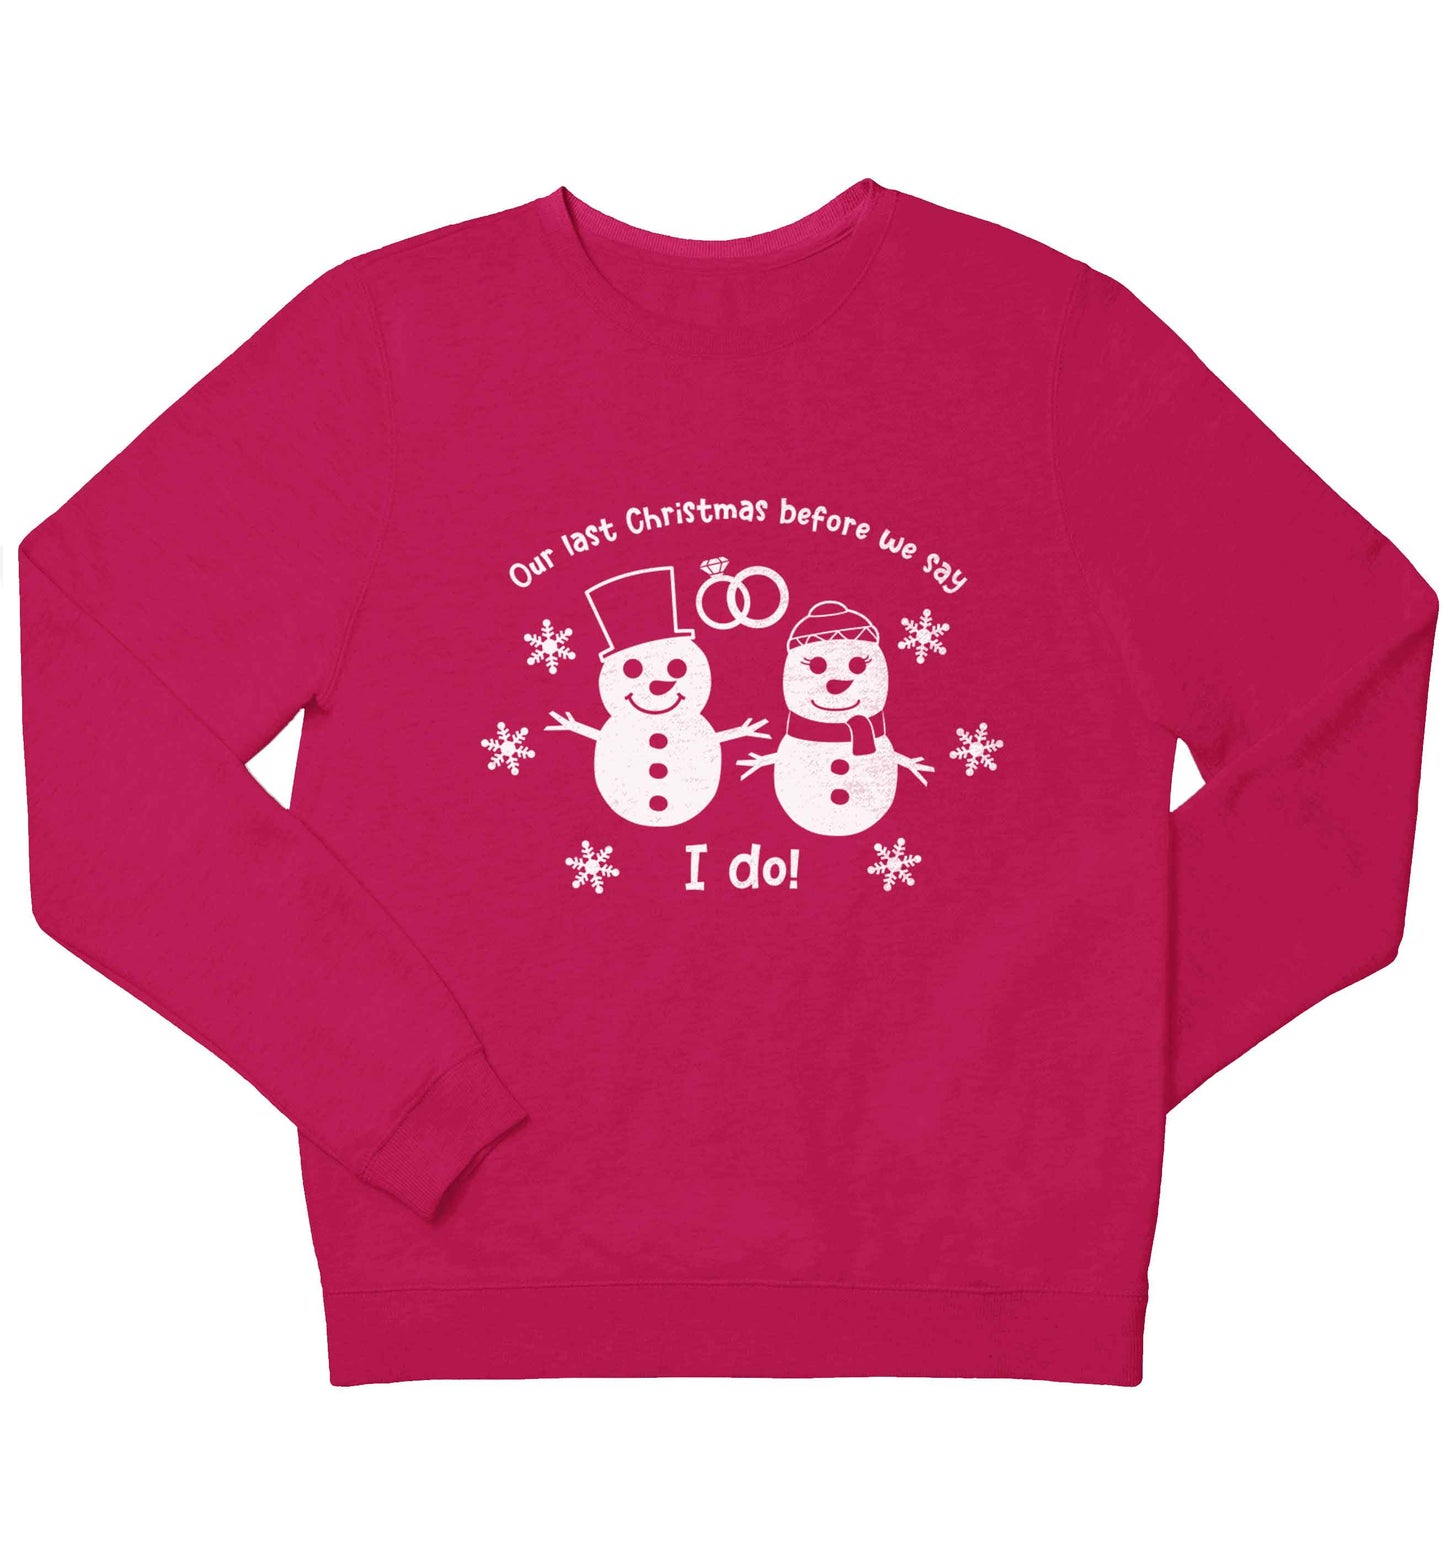 Last Christmas before we say I do children's pink sweater 12-13 Years